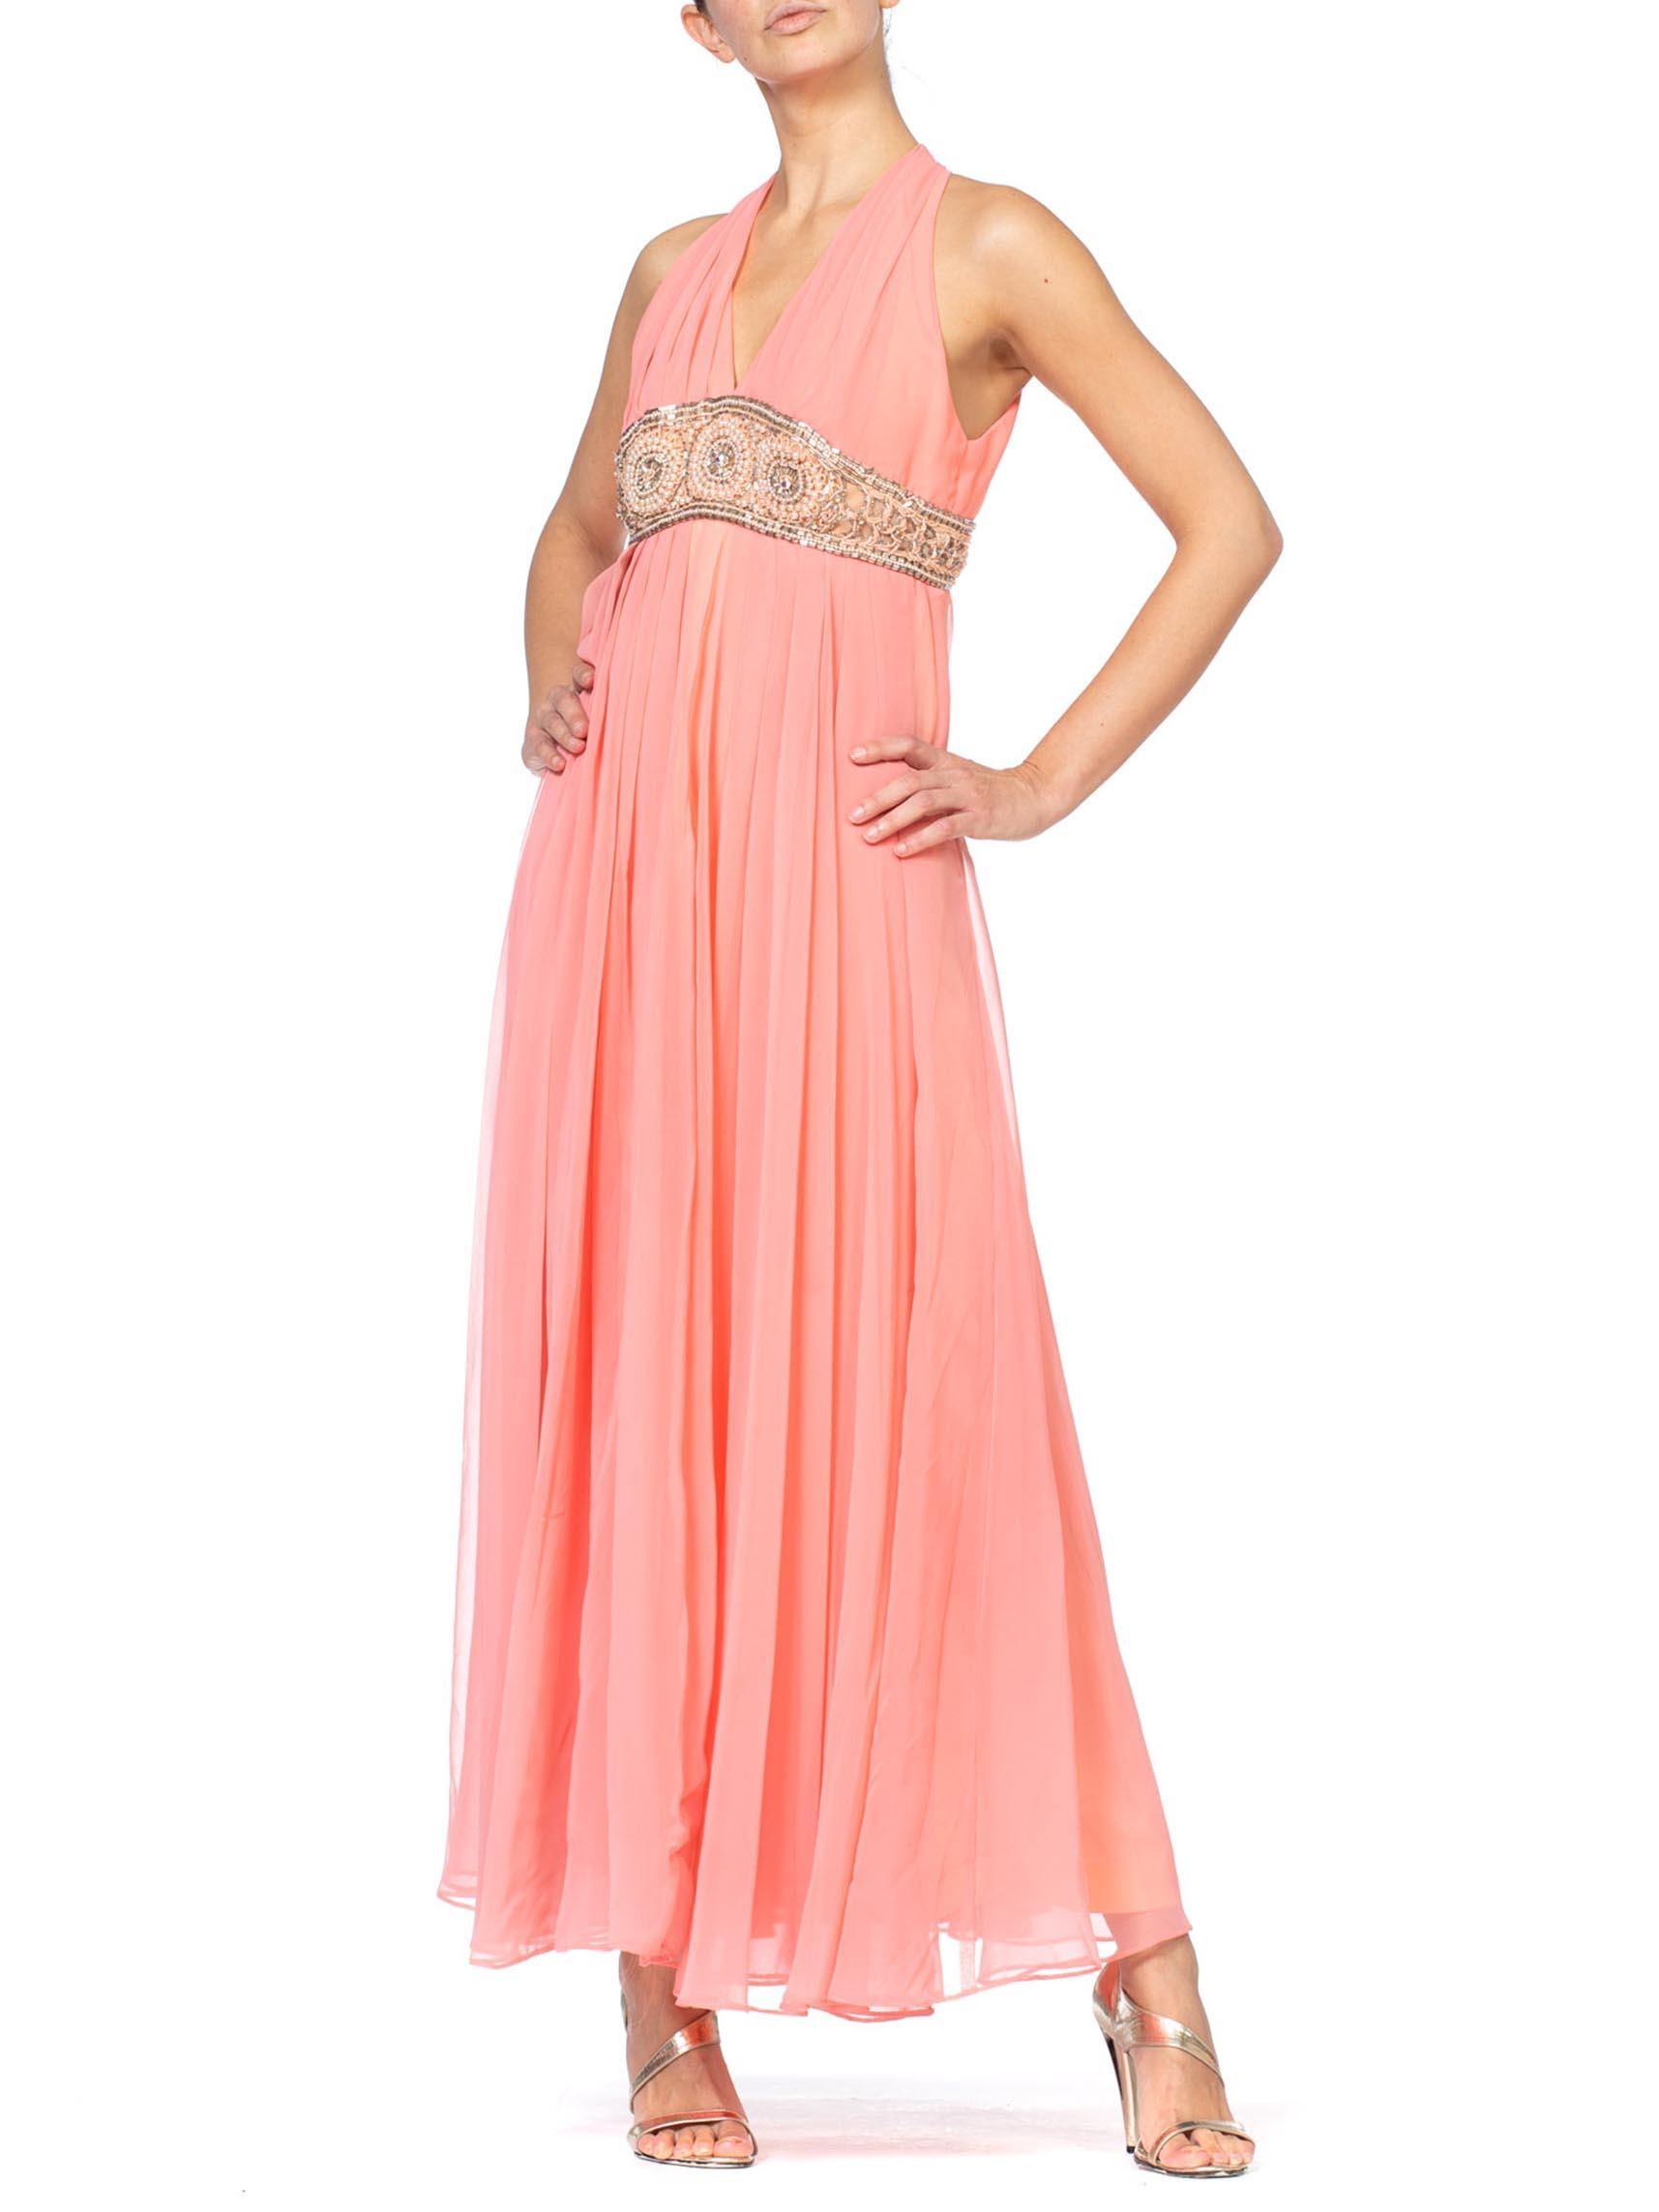 1970S Salmon Pink Polyester Chiffon Empire Waist Godess Gown With Crystal Beadi For Sale 2